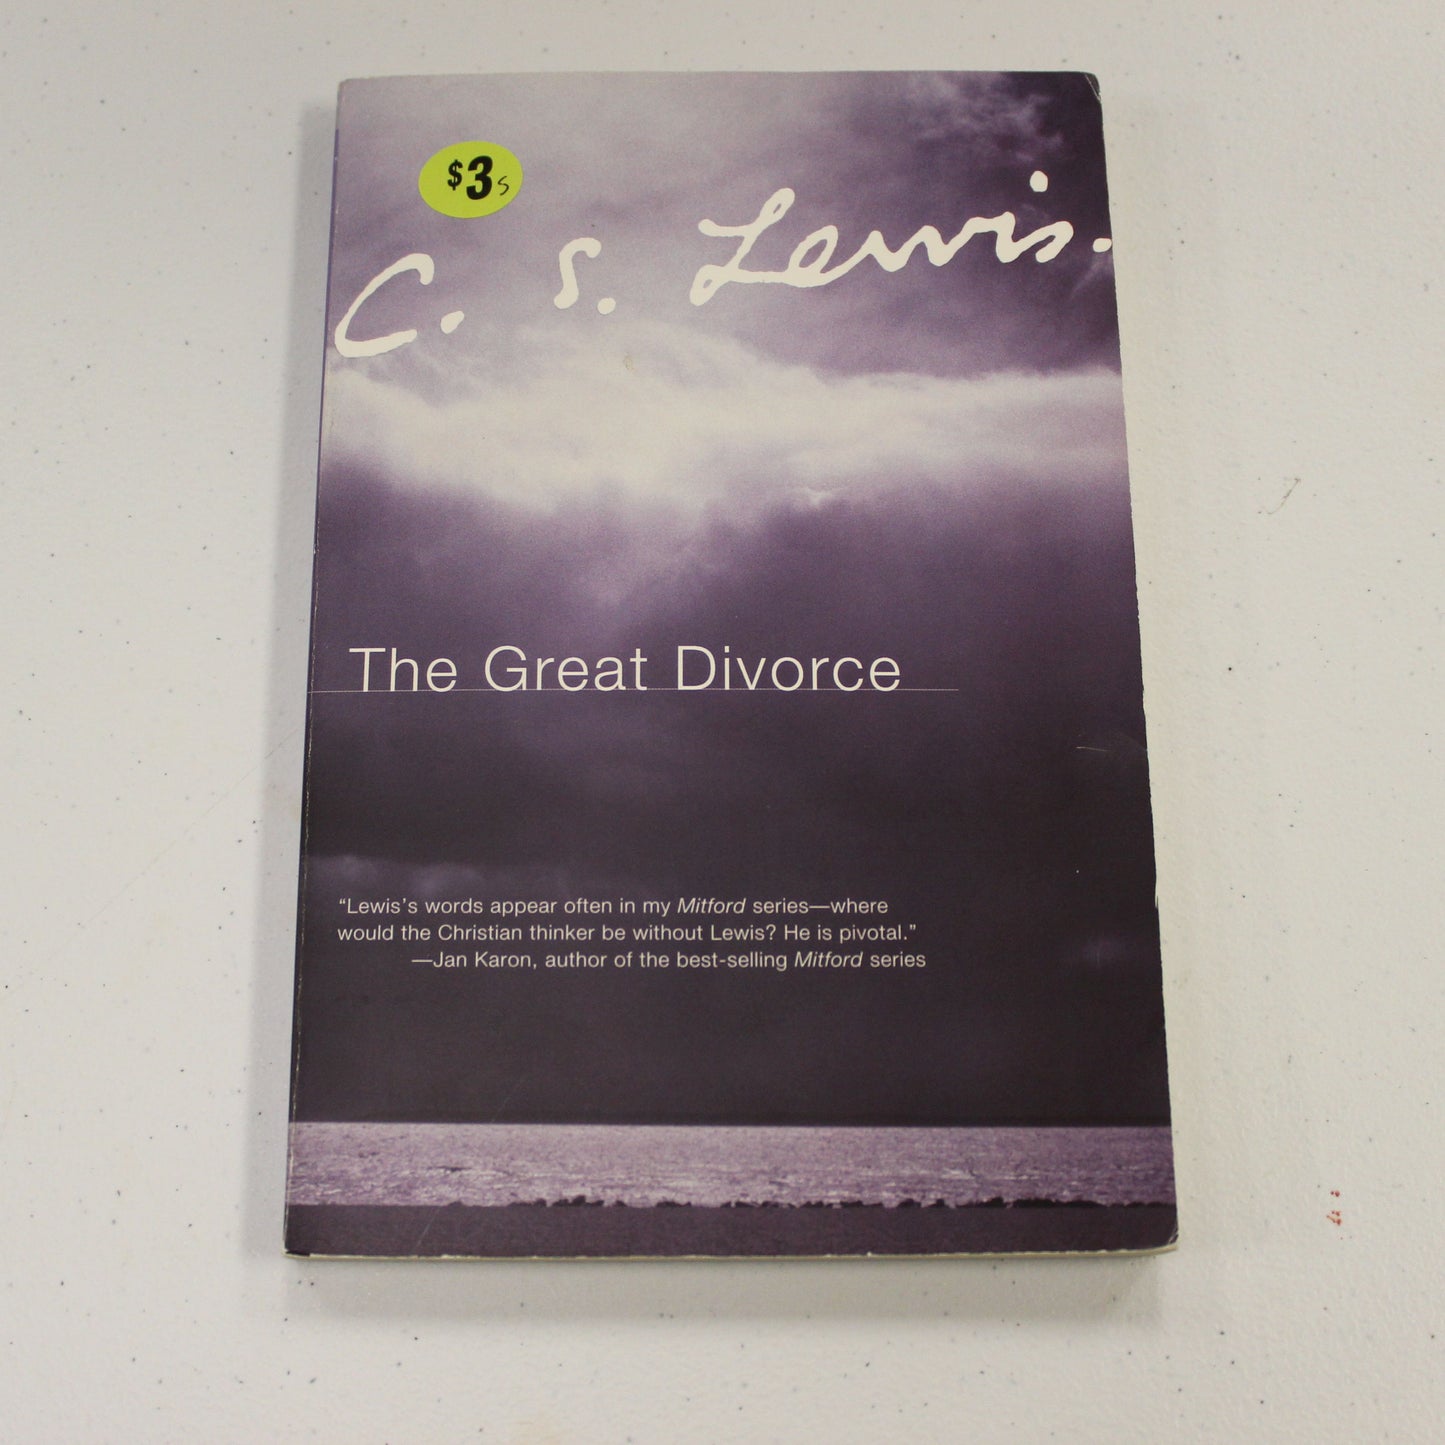 THE GREAT DIVORCE